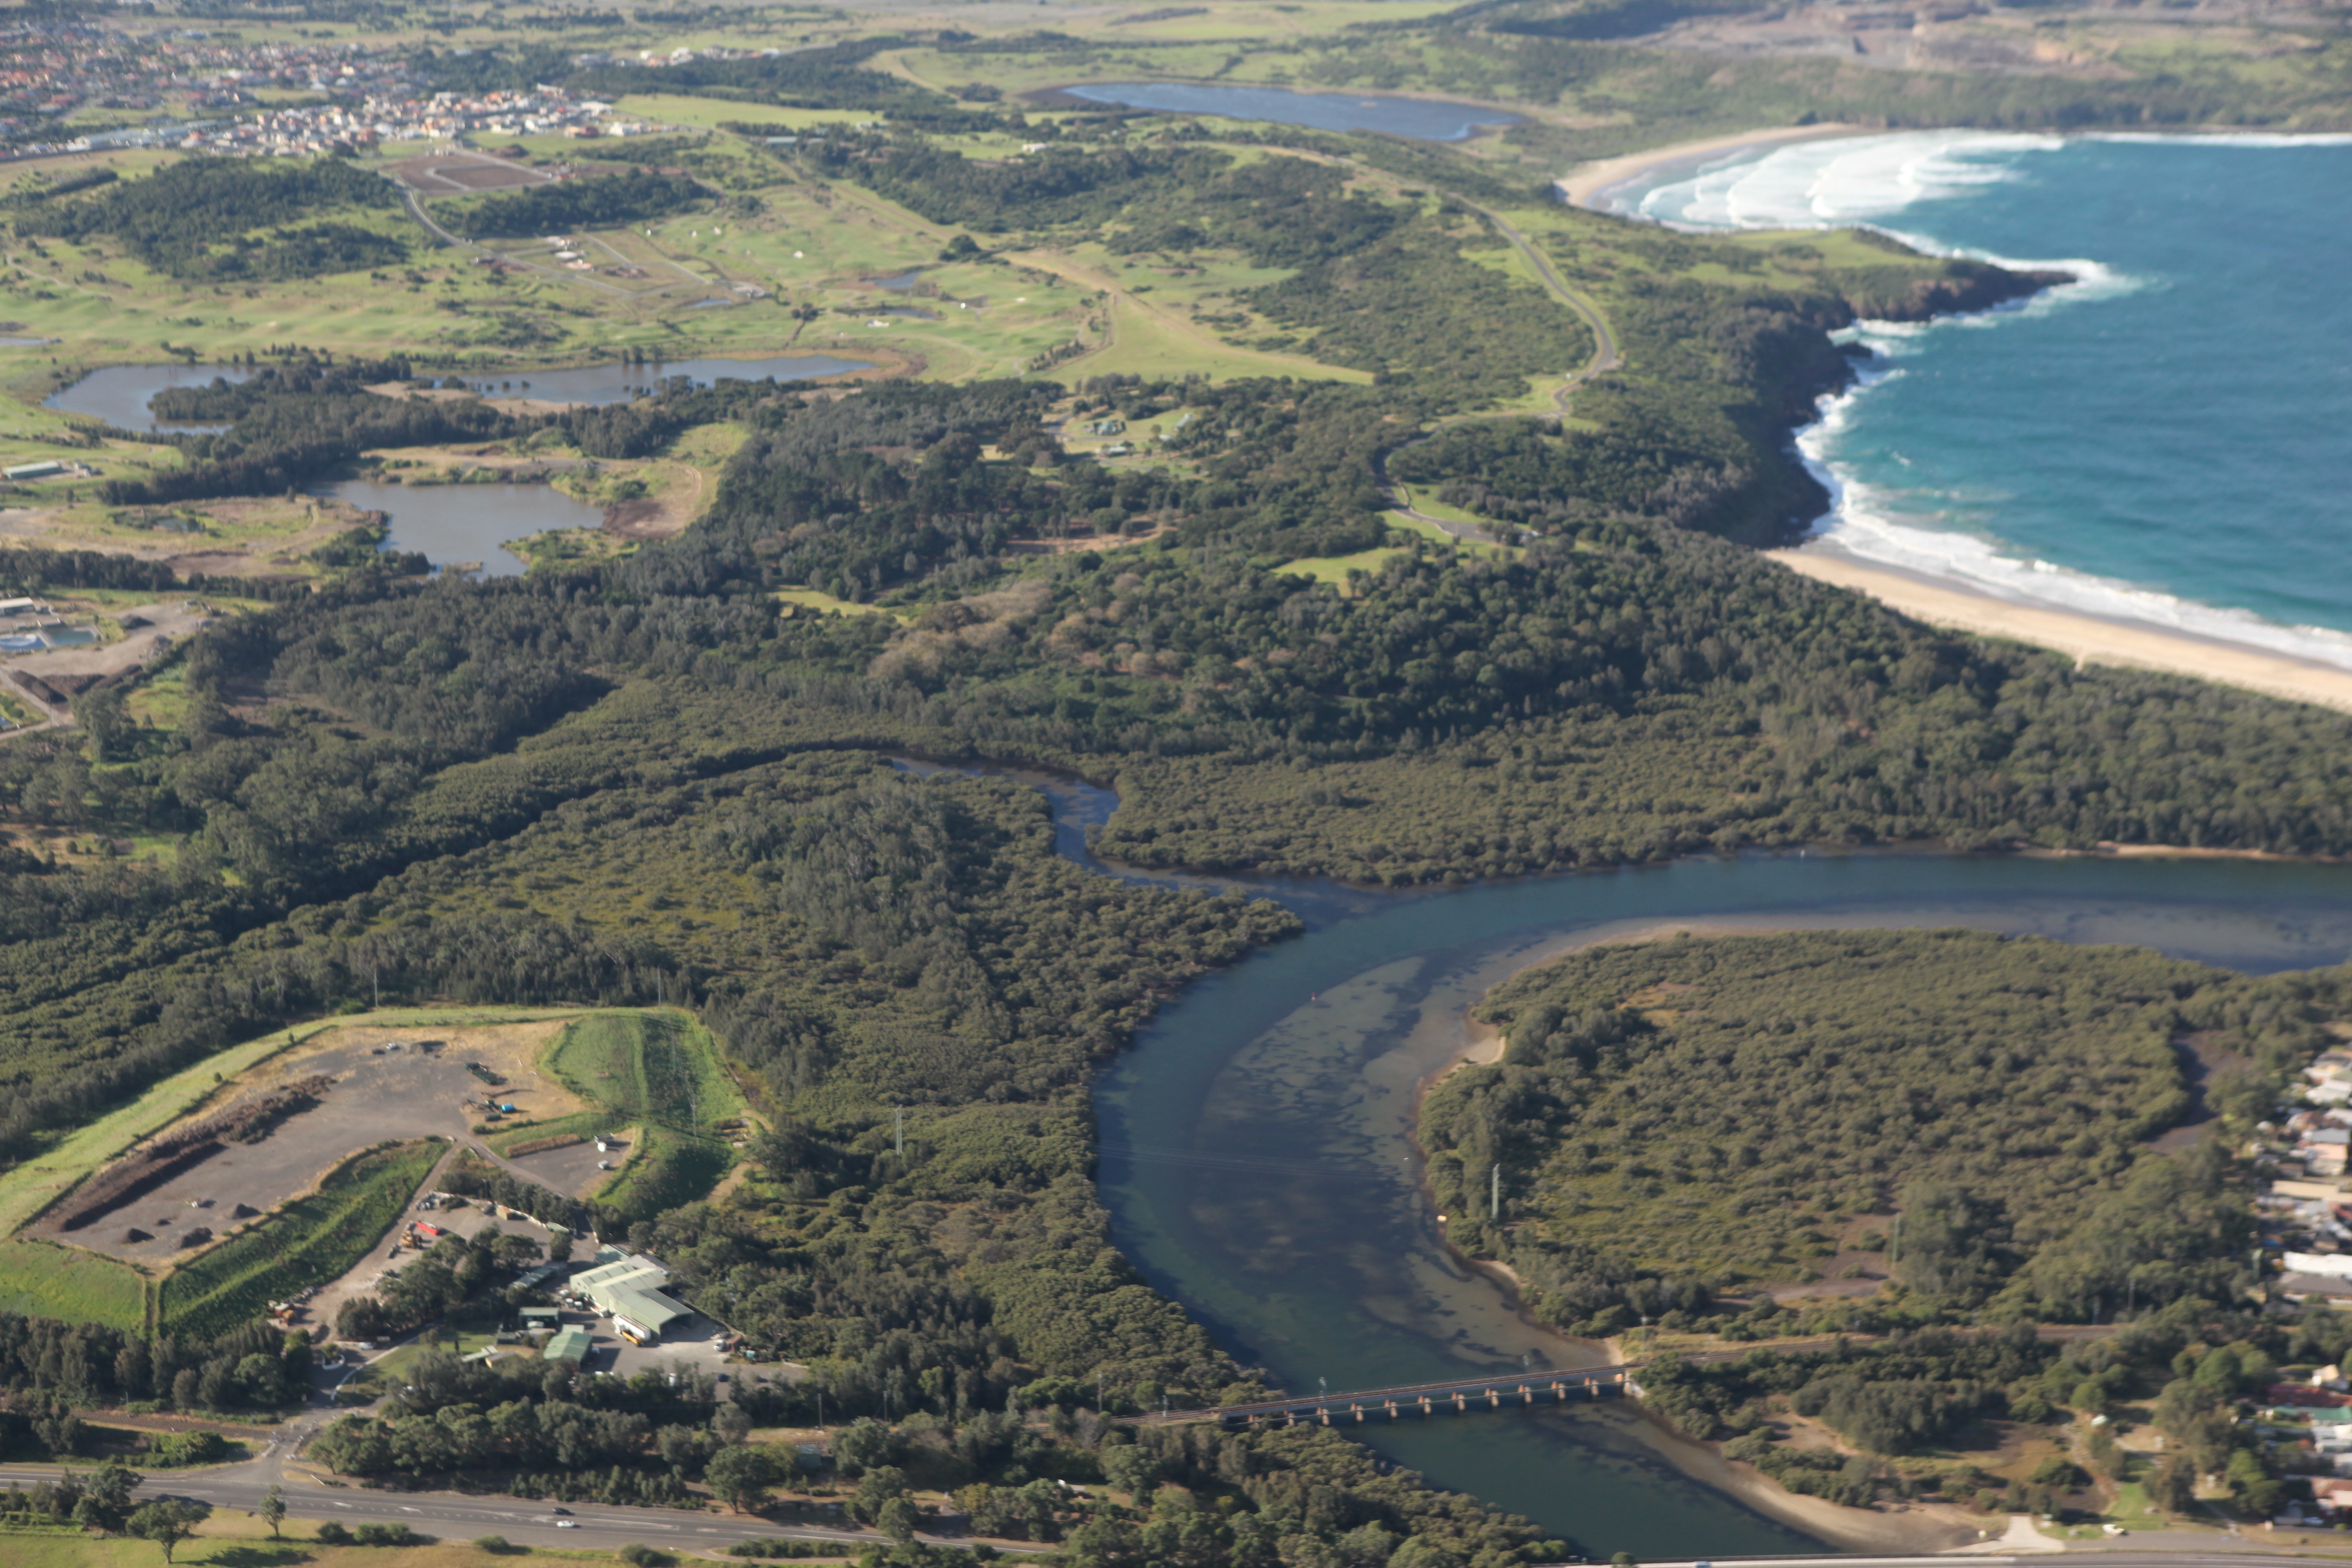 Aerial view of the Minnamurra mangroves with a river and creeks snaking through the trees and the beach just behind them.